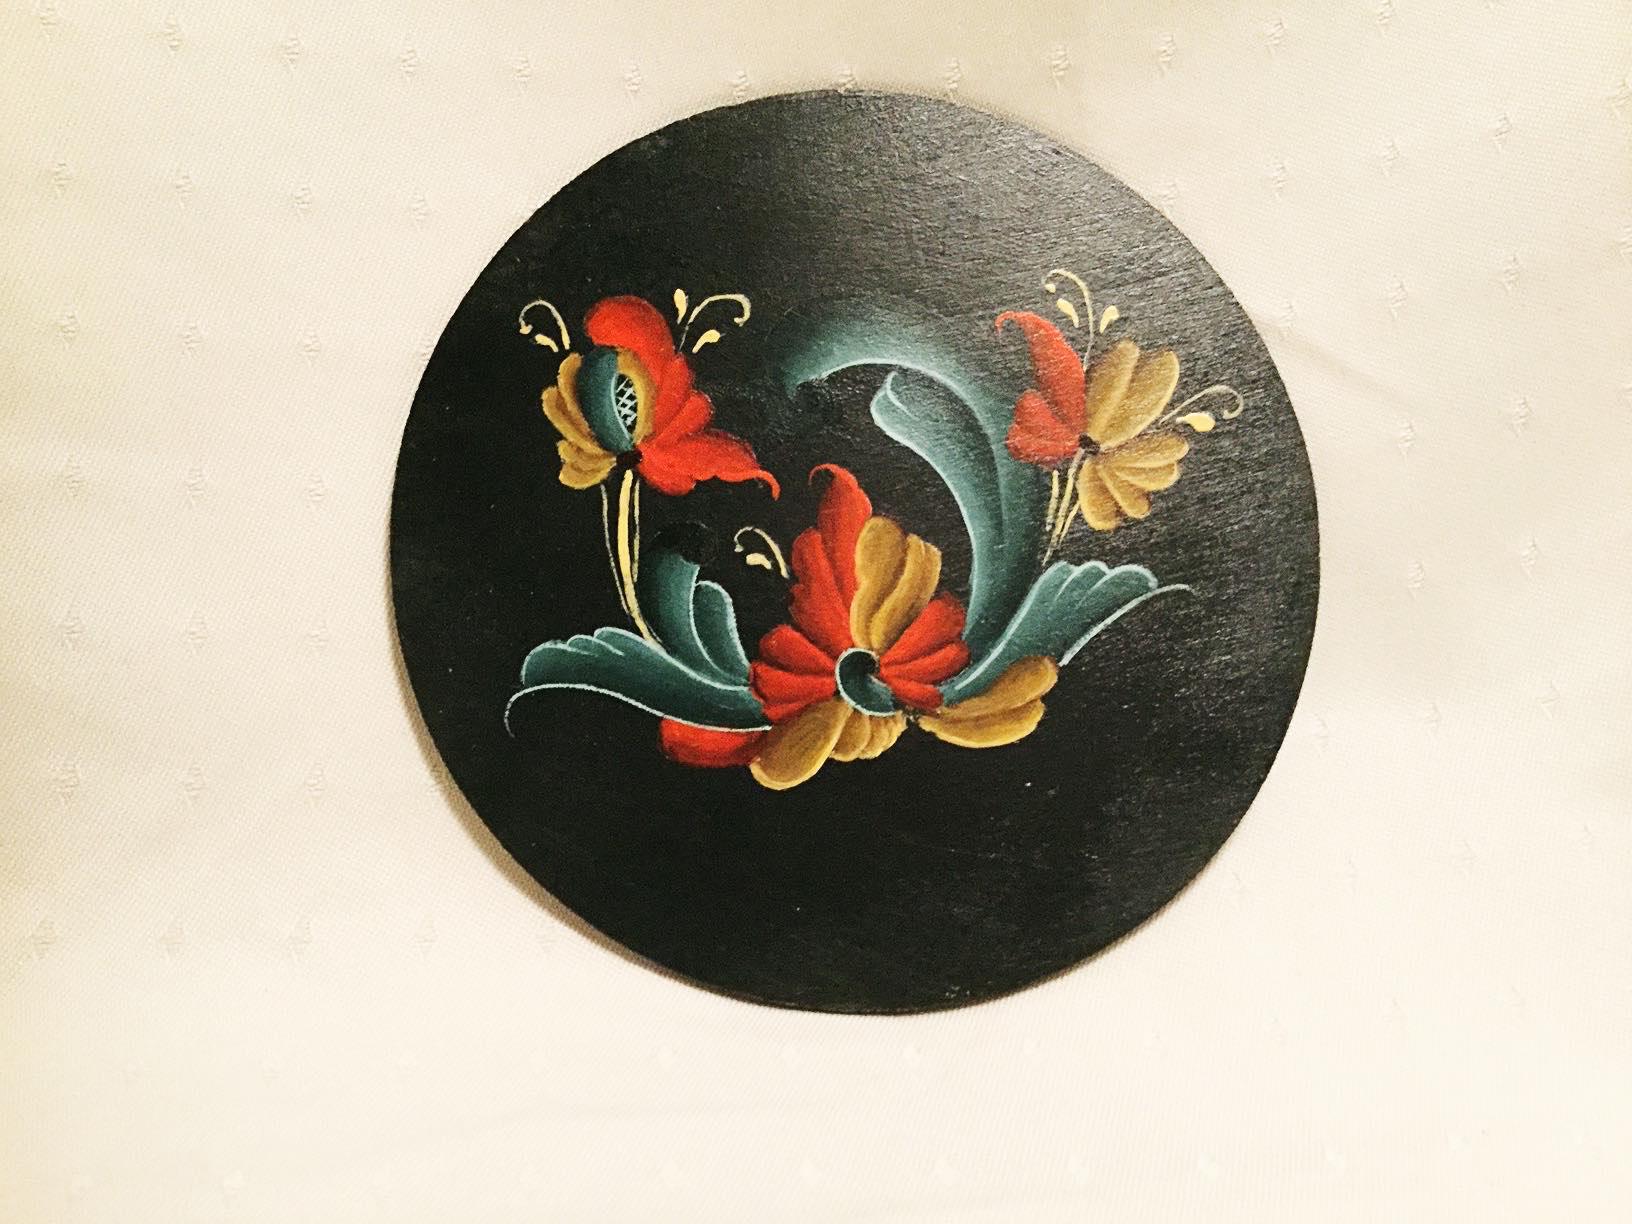 Rosemaling 101 with Alan Pearson